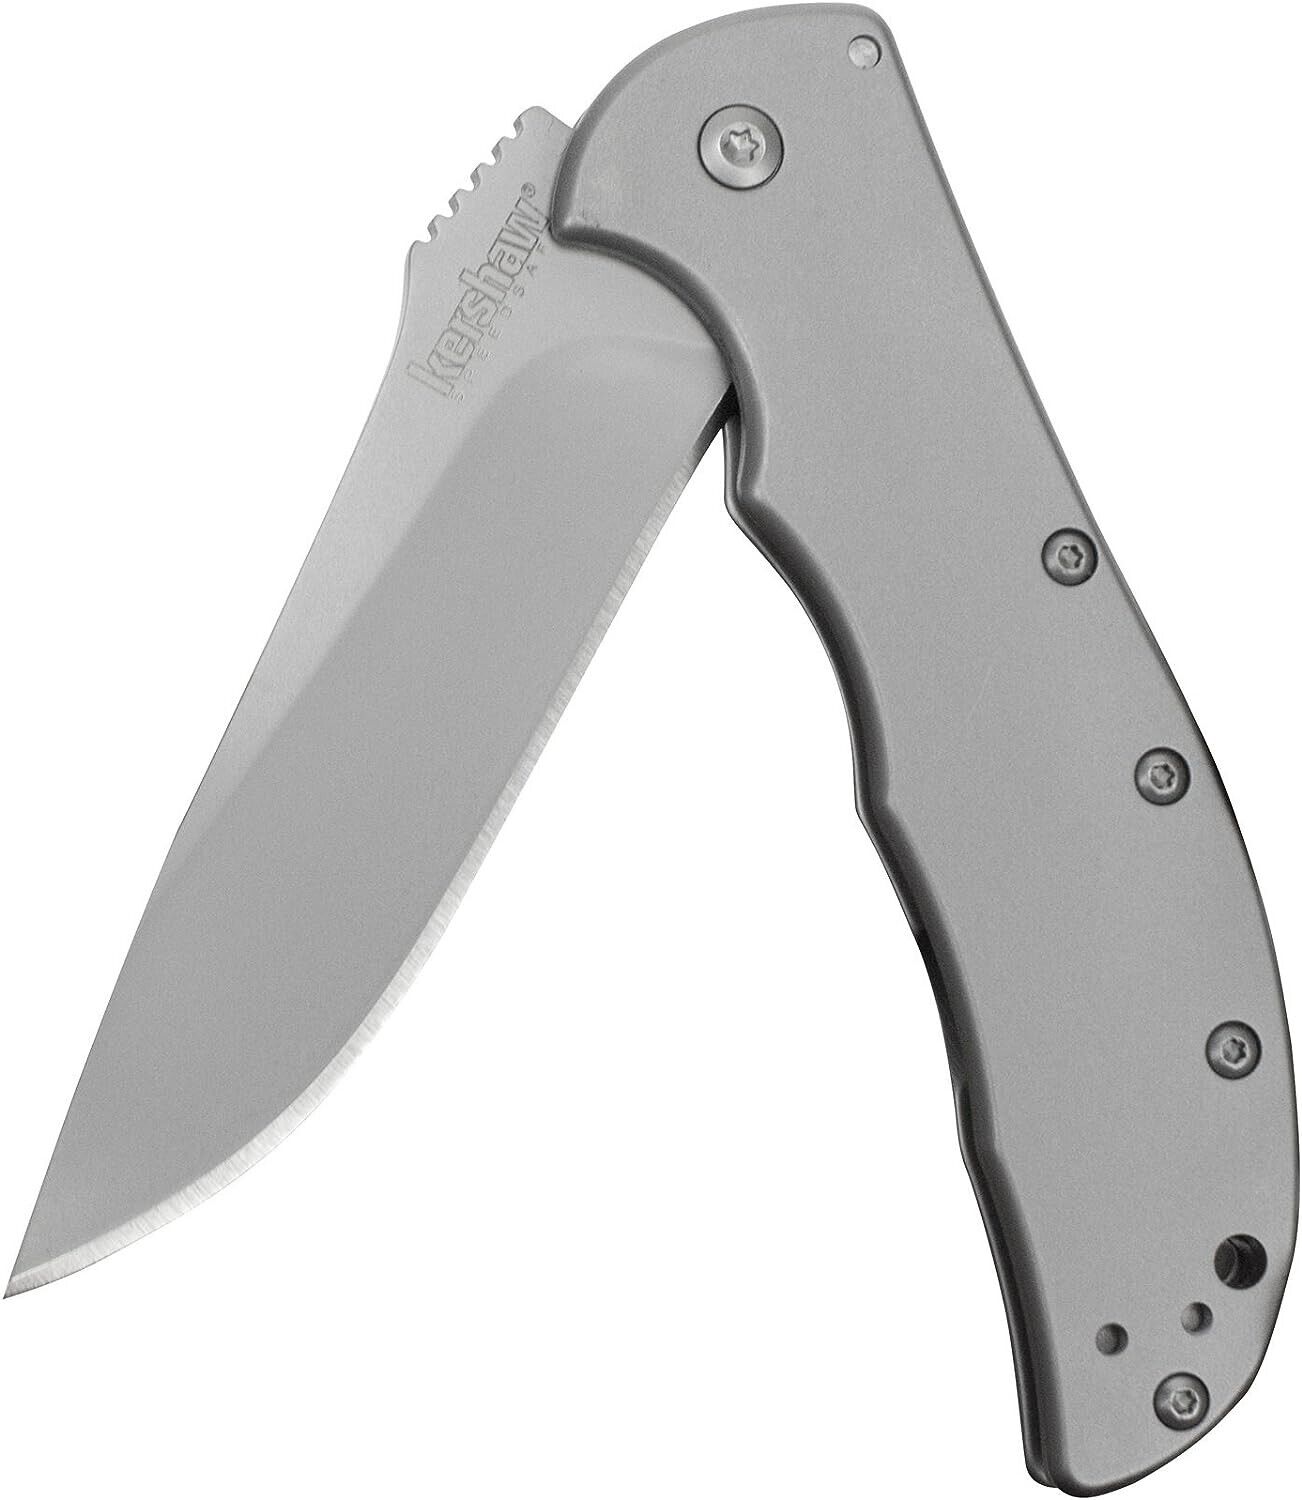 Kershaw Volt SS 3655 Stainless Steel Straight Assist Folding Pocket Knife